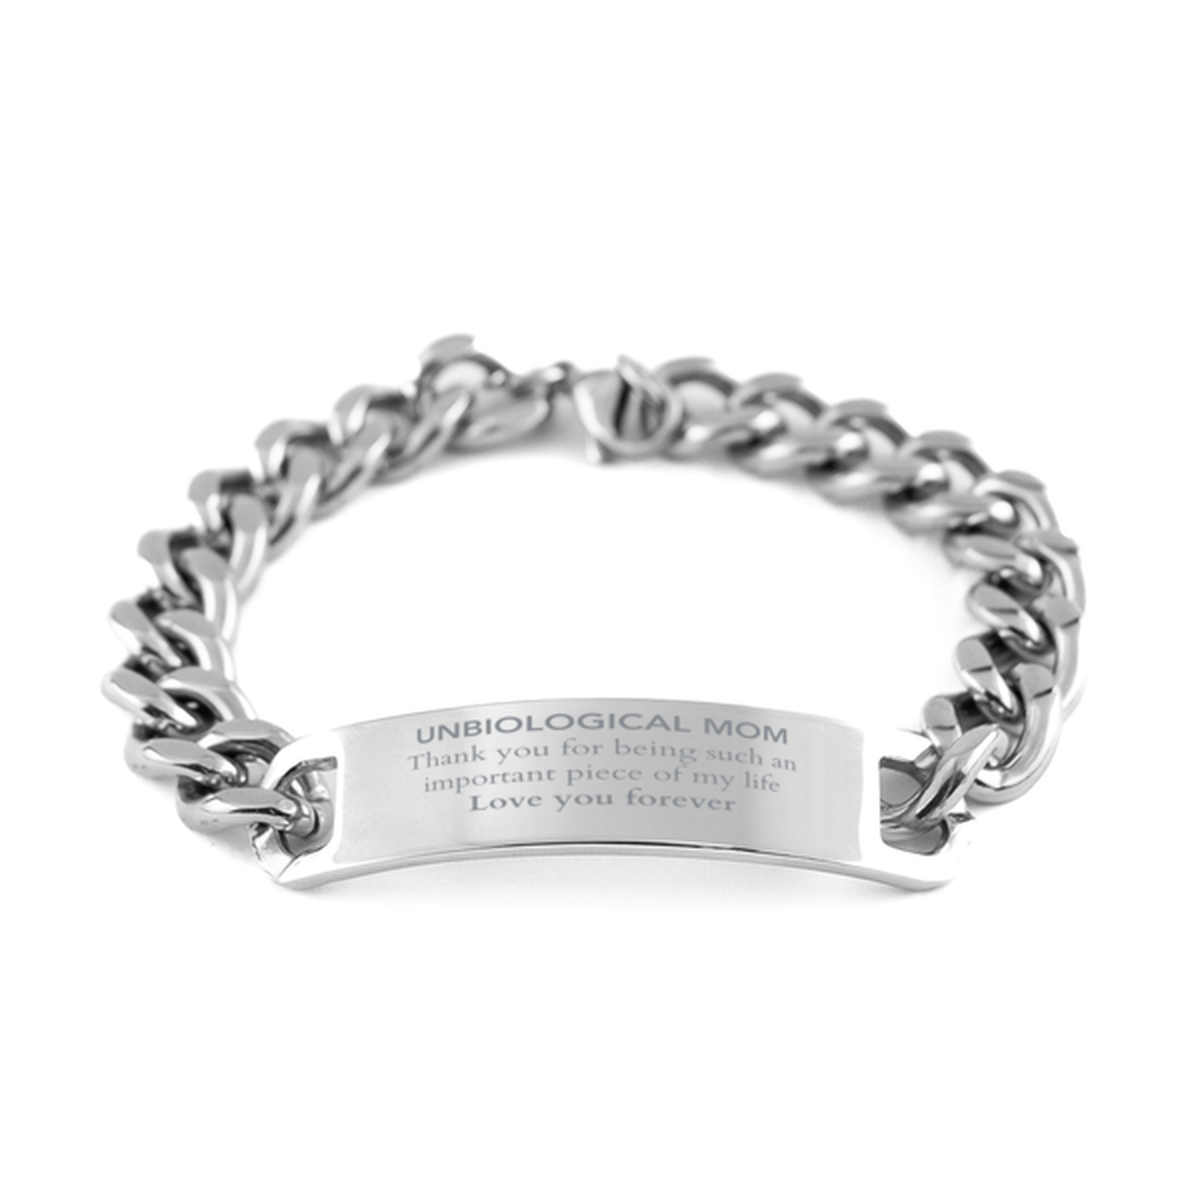 Appropriate Unbiological Mom Cuban Chain Stainless Steel Bracelet Epic Birthday Gifts for Unbiological Mom Thank you for being such an important piece of my life Unbiological Mom Christmas Mothers Fathers Day